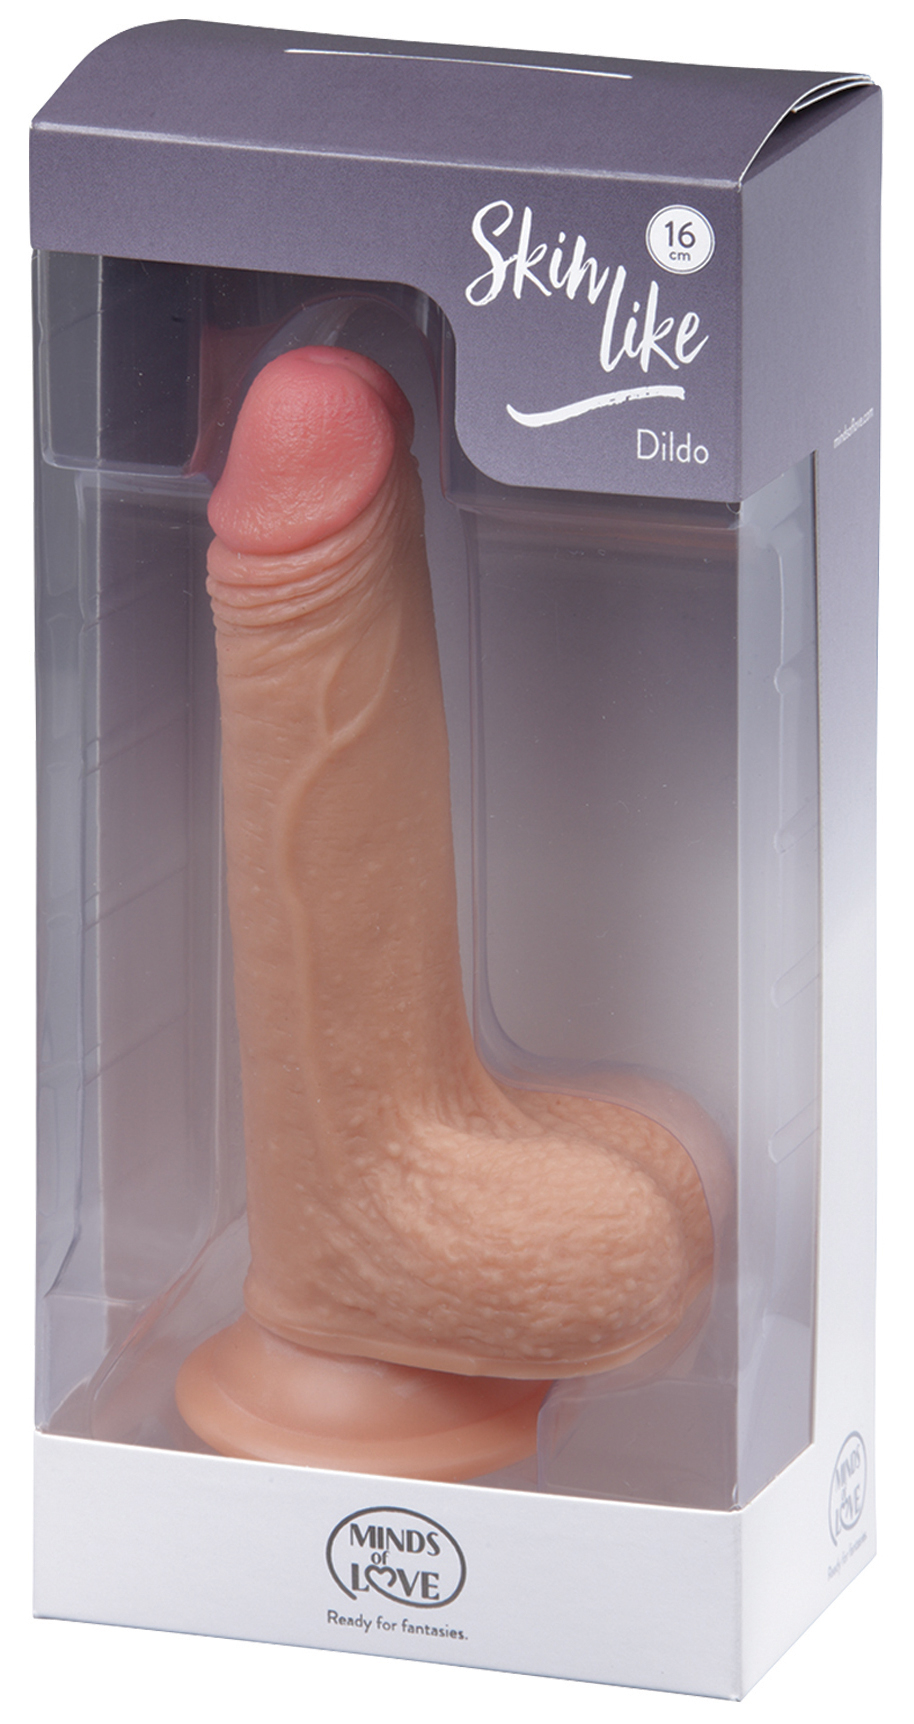 This extremely sensitive dildo, with its pronounced glans, textured scrotum...